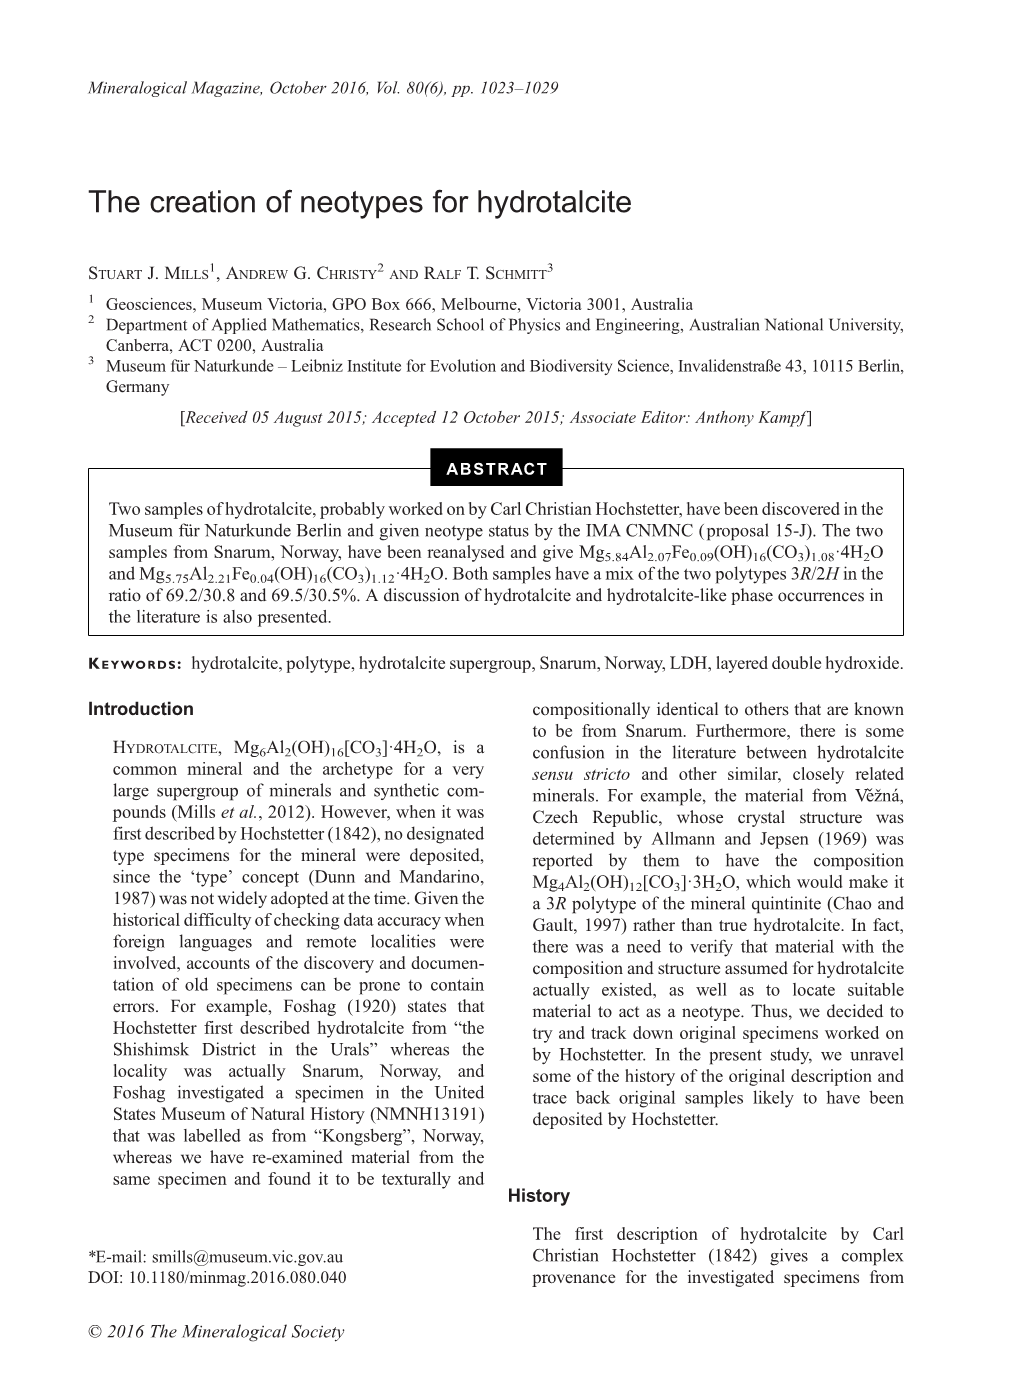 The Creation of Neotypes for Hydrotalcite